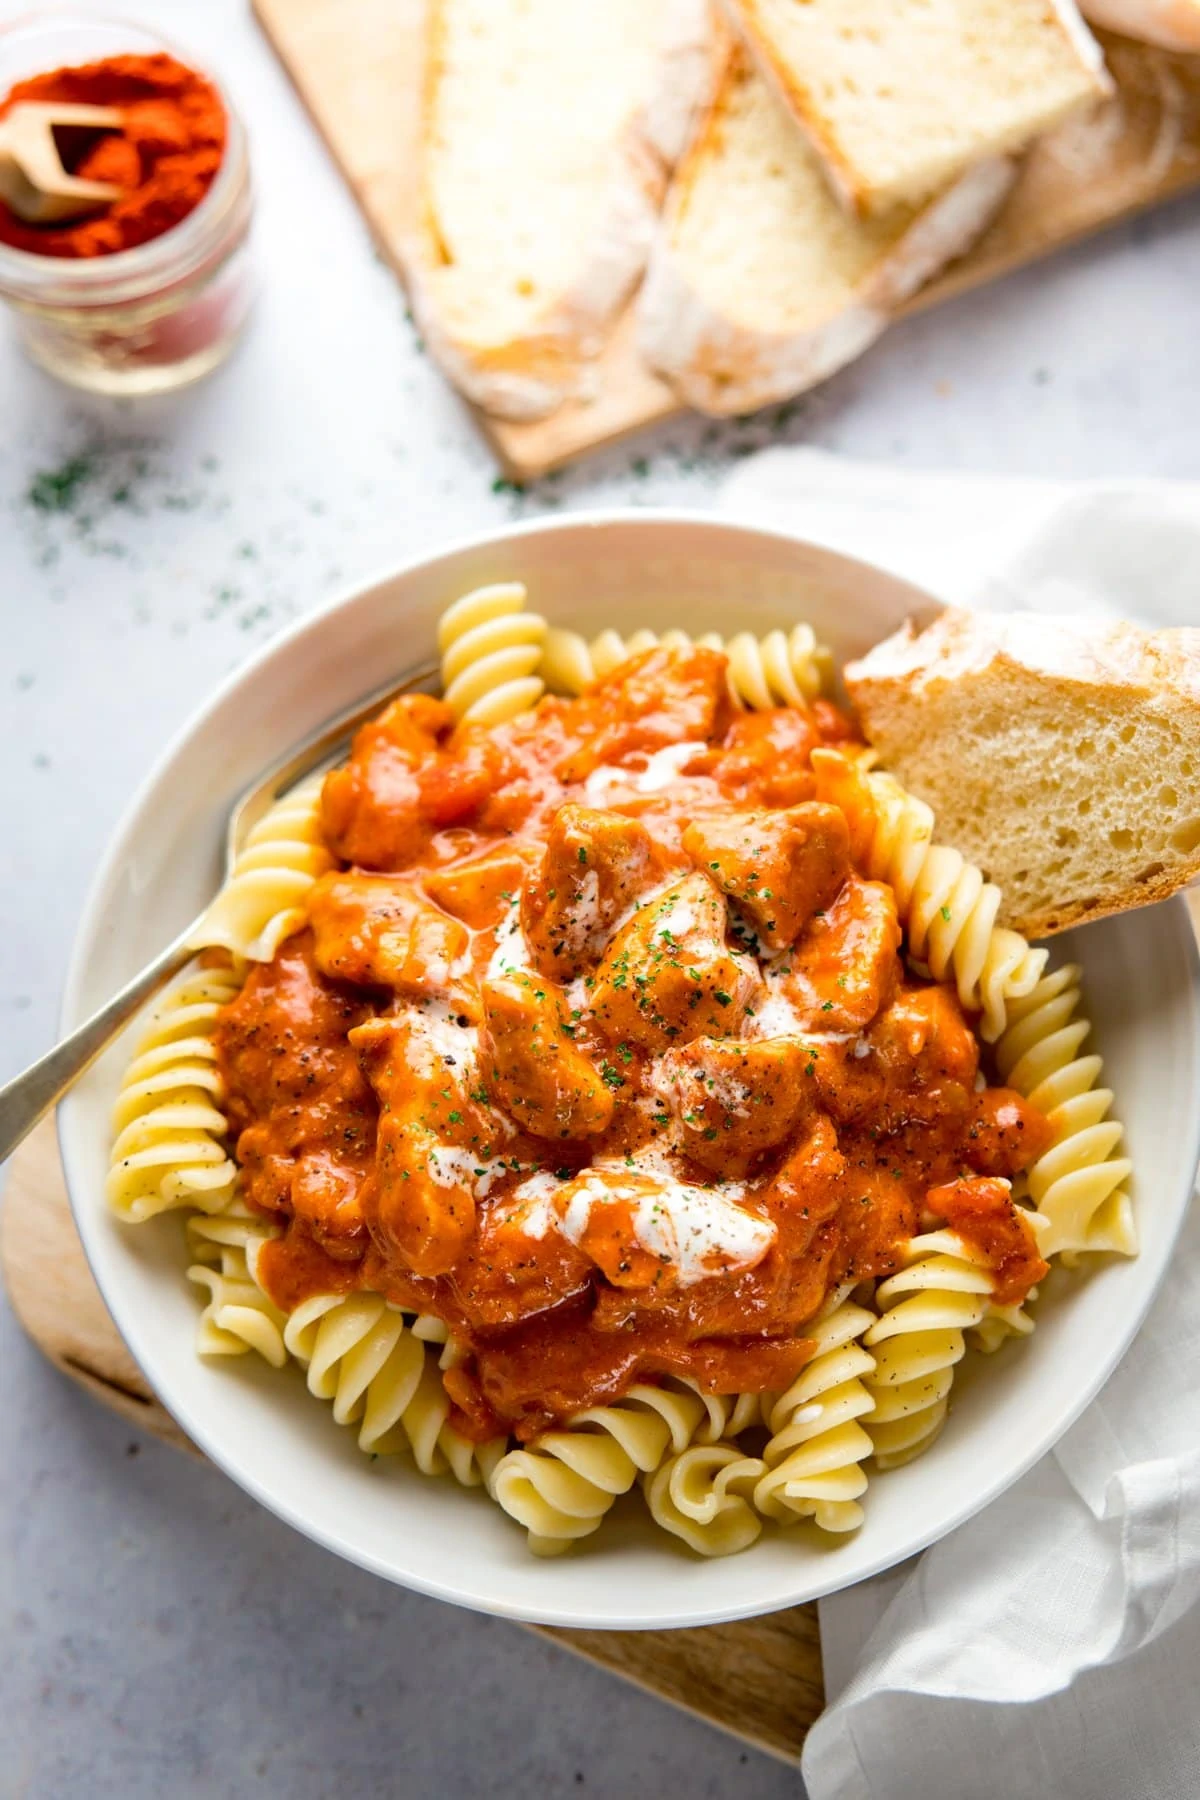 Overhead image of a white bowl filled with chicken paprikash, pasta and a piece of bread. Bowl is on a light background and there is more bread a napkin and jar of paprika in shot.